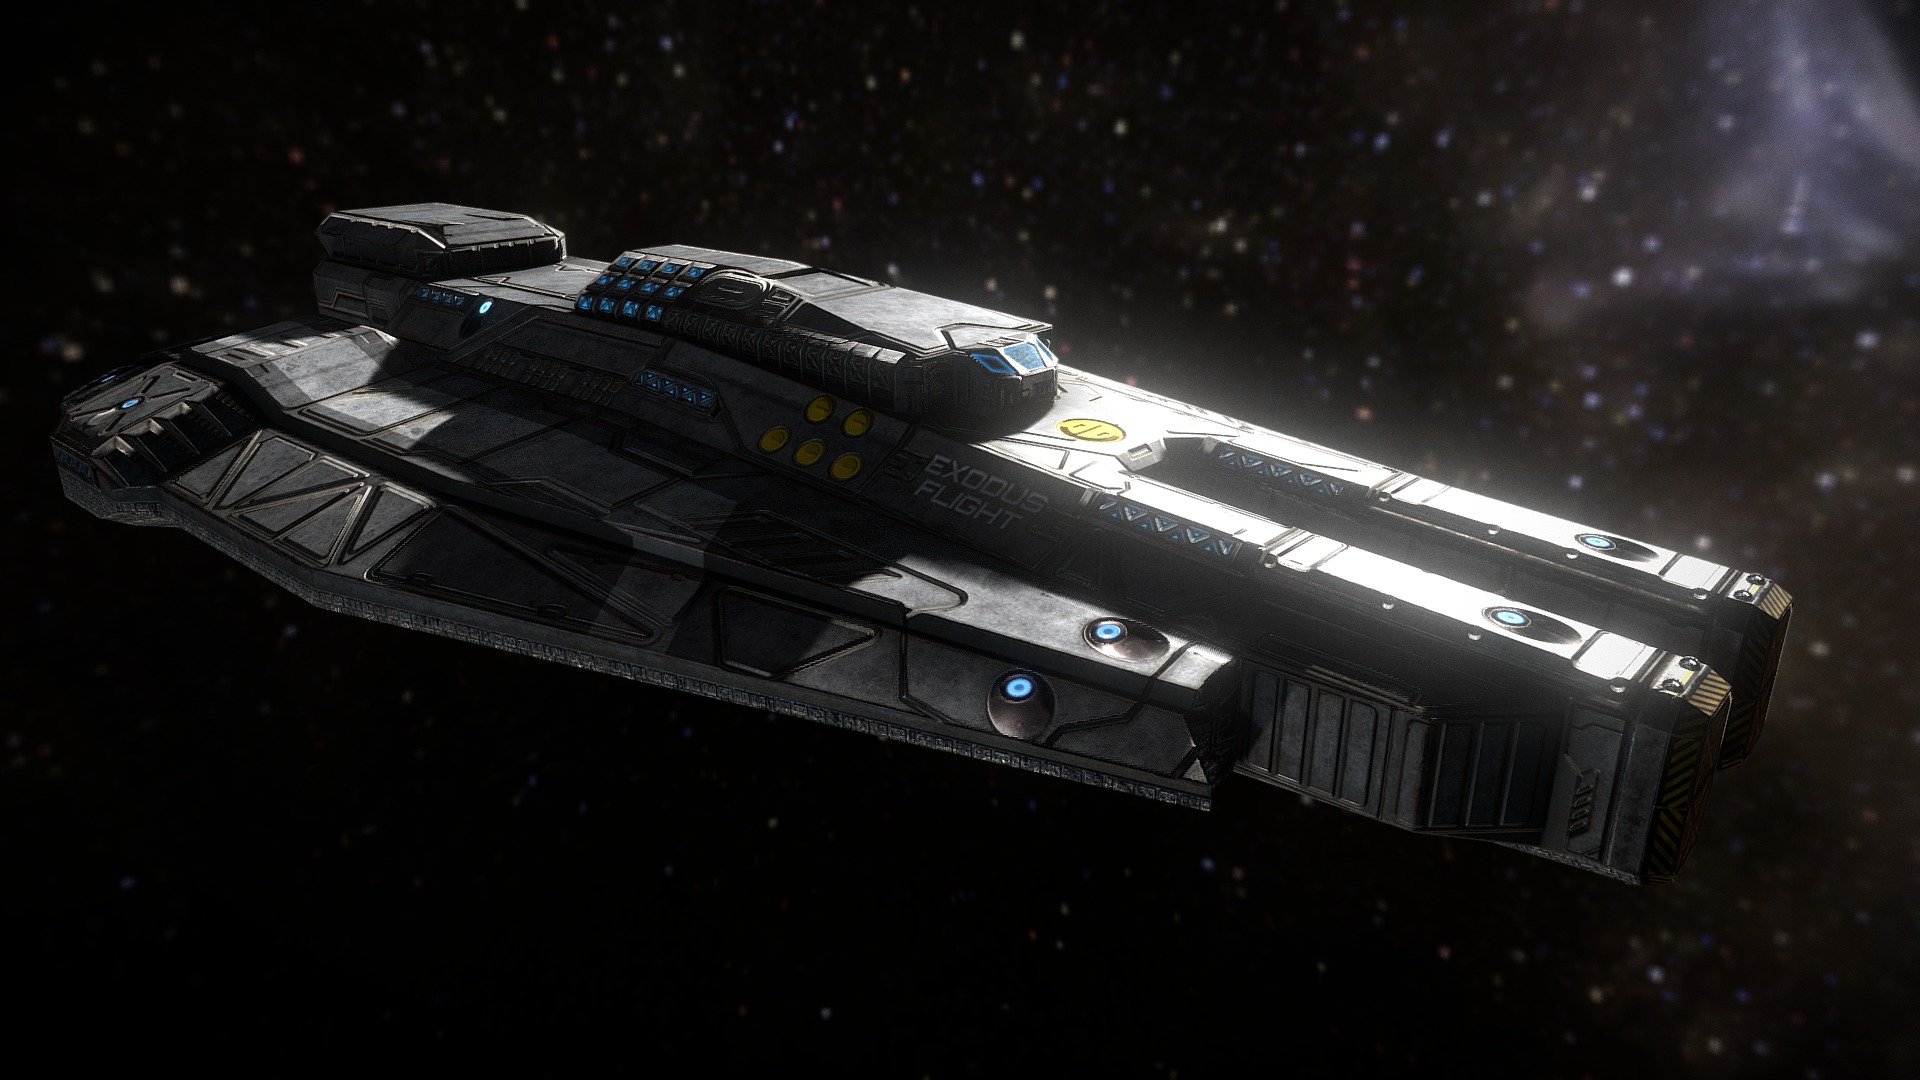 The Exodus Flight, a colony spaceship I made for the Epic Megajam 2020 gamejam entry my team did. 
This is a post-jam model, for cinematics planned to be added in an update.
This model's texture is spread over two 4k maps for medium range shots.

The ship design is based off my other team member, Gaspard Hünenberger's model of the ship.

The game's page is here:
https://harrisonleon.itch.io/exodus-flight - Exodus Flight Spaceship - 3D model by Lynx88 3d model